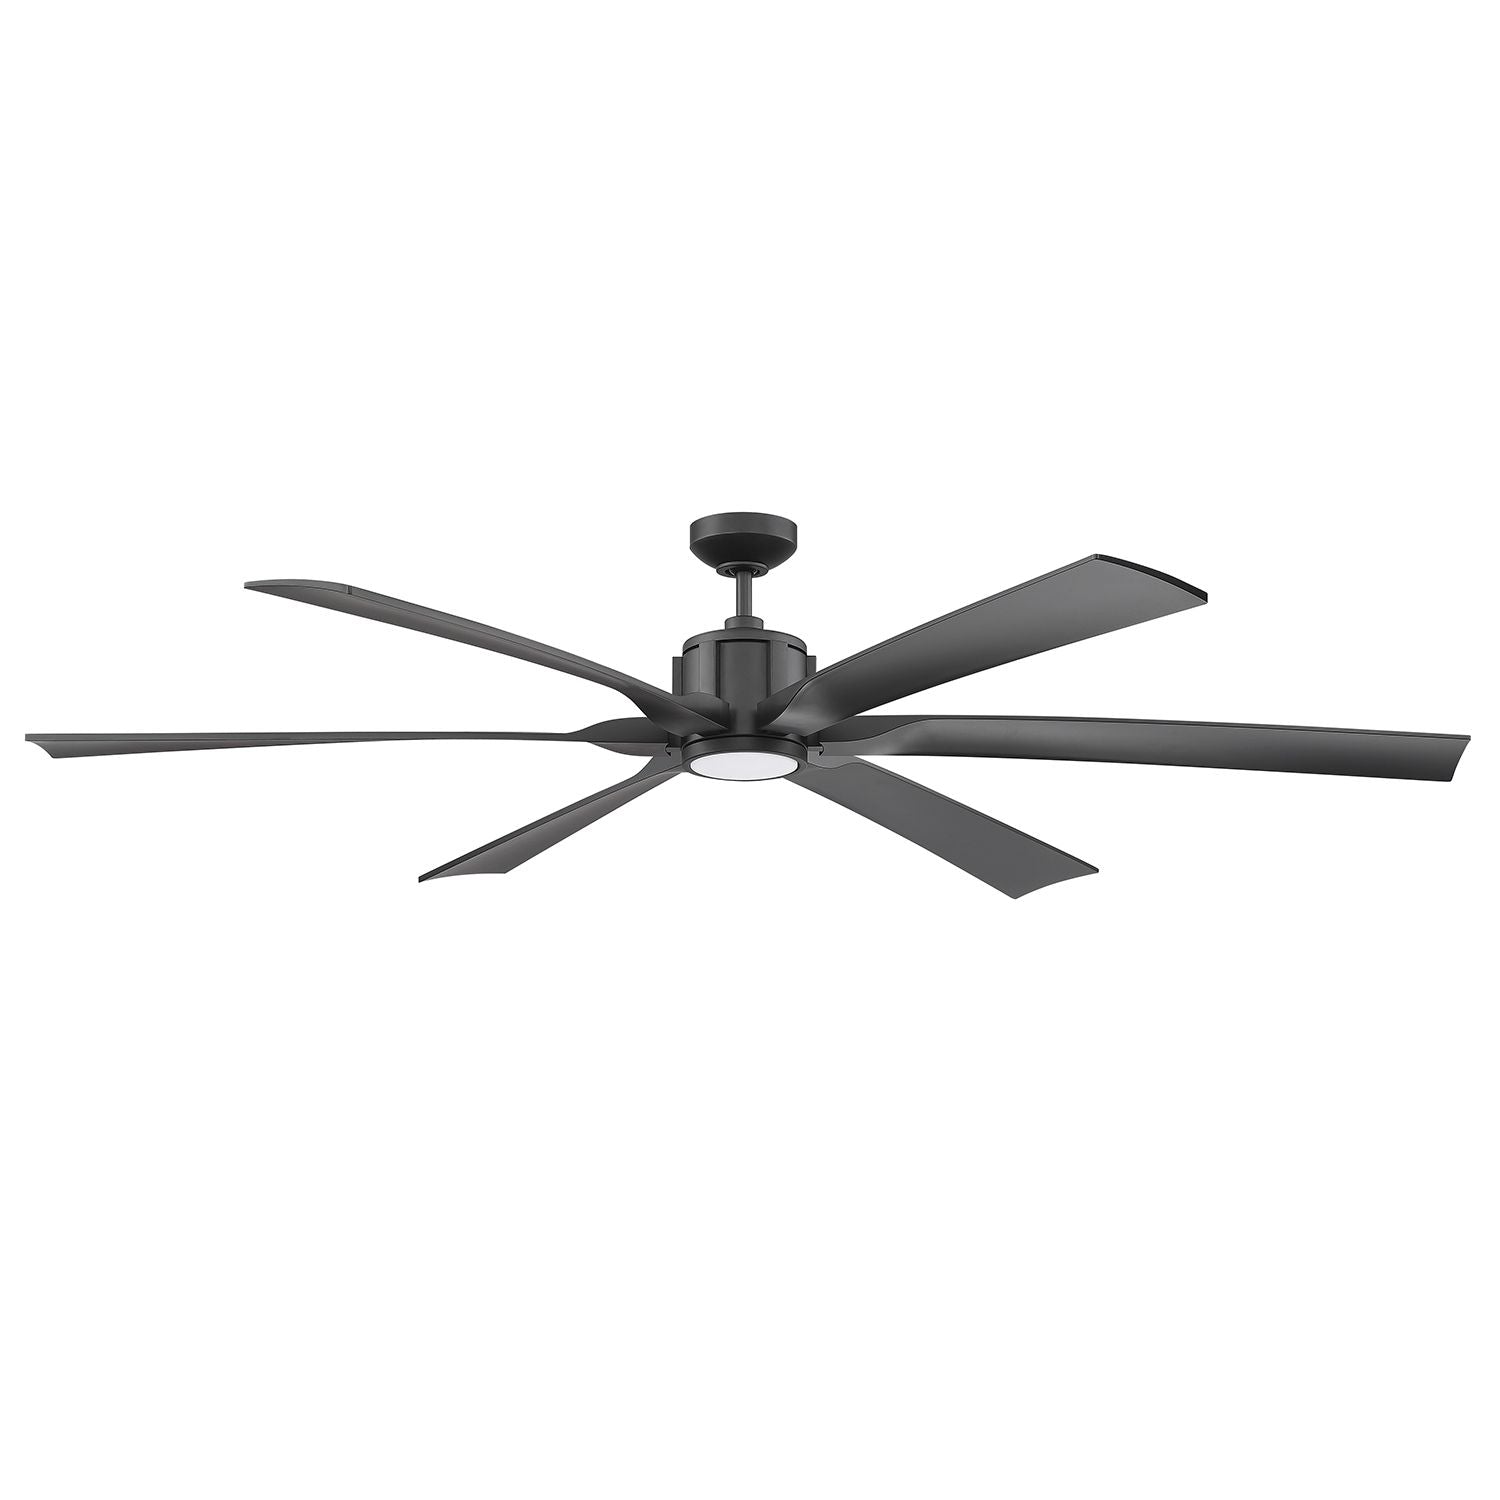 Mach-1 Ceiling Fan Black with Matching blades